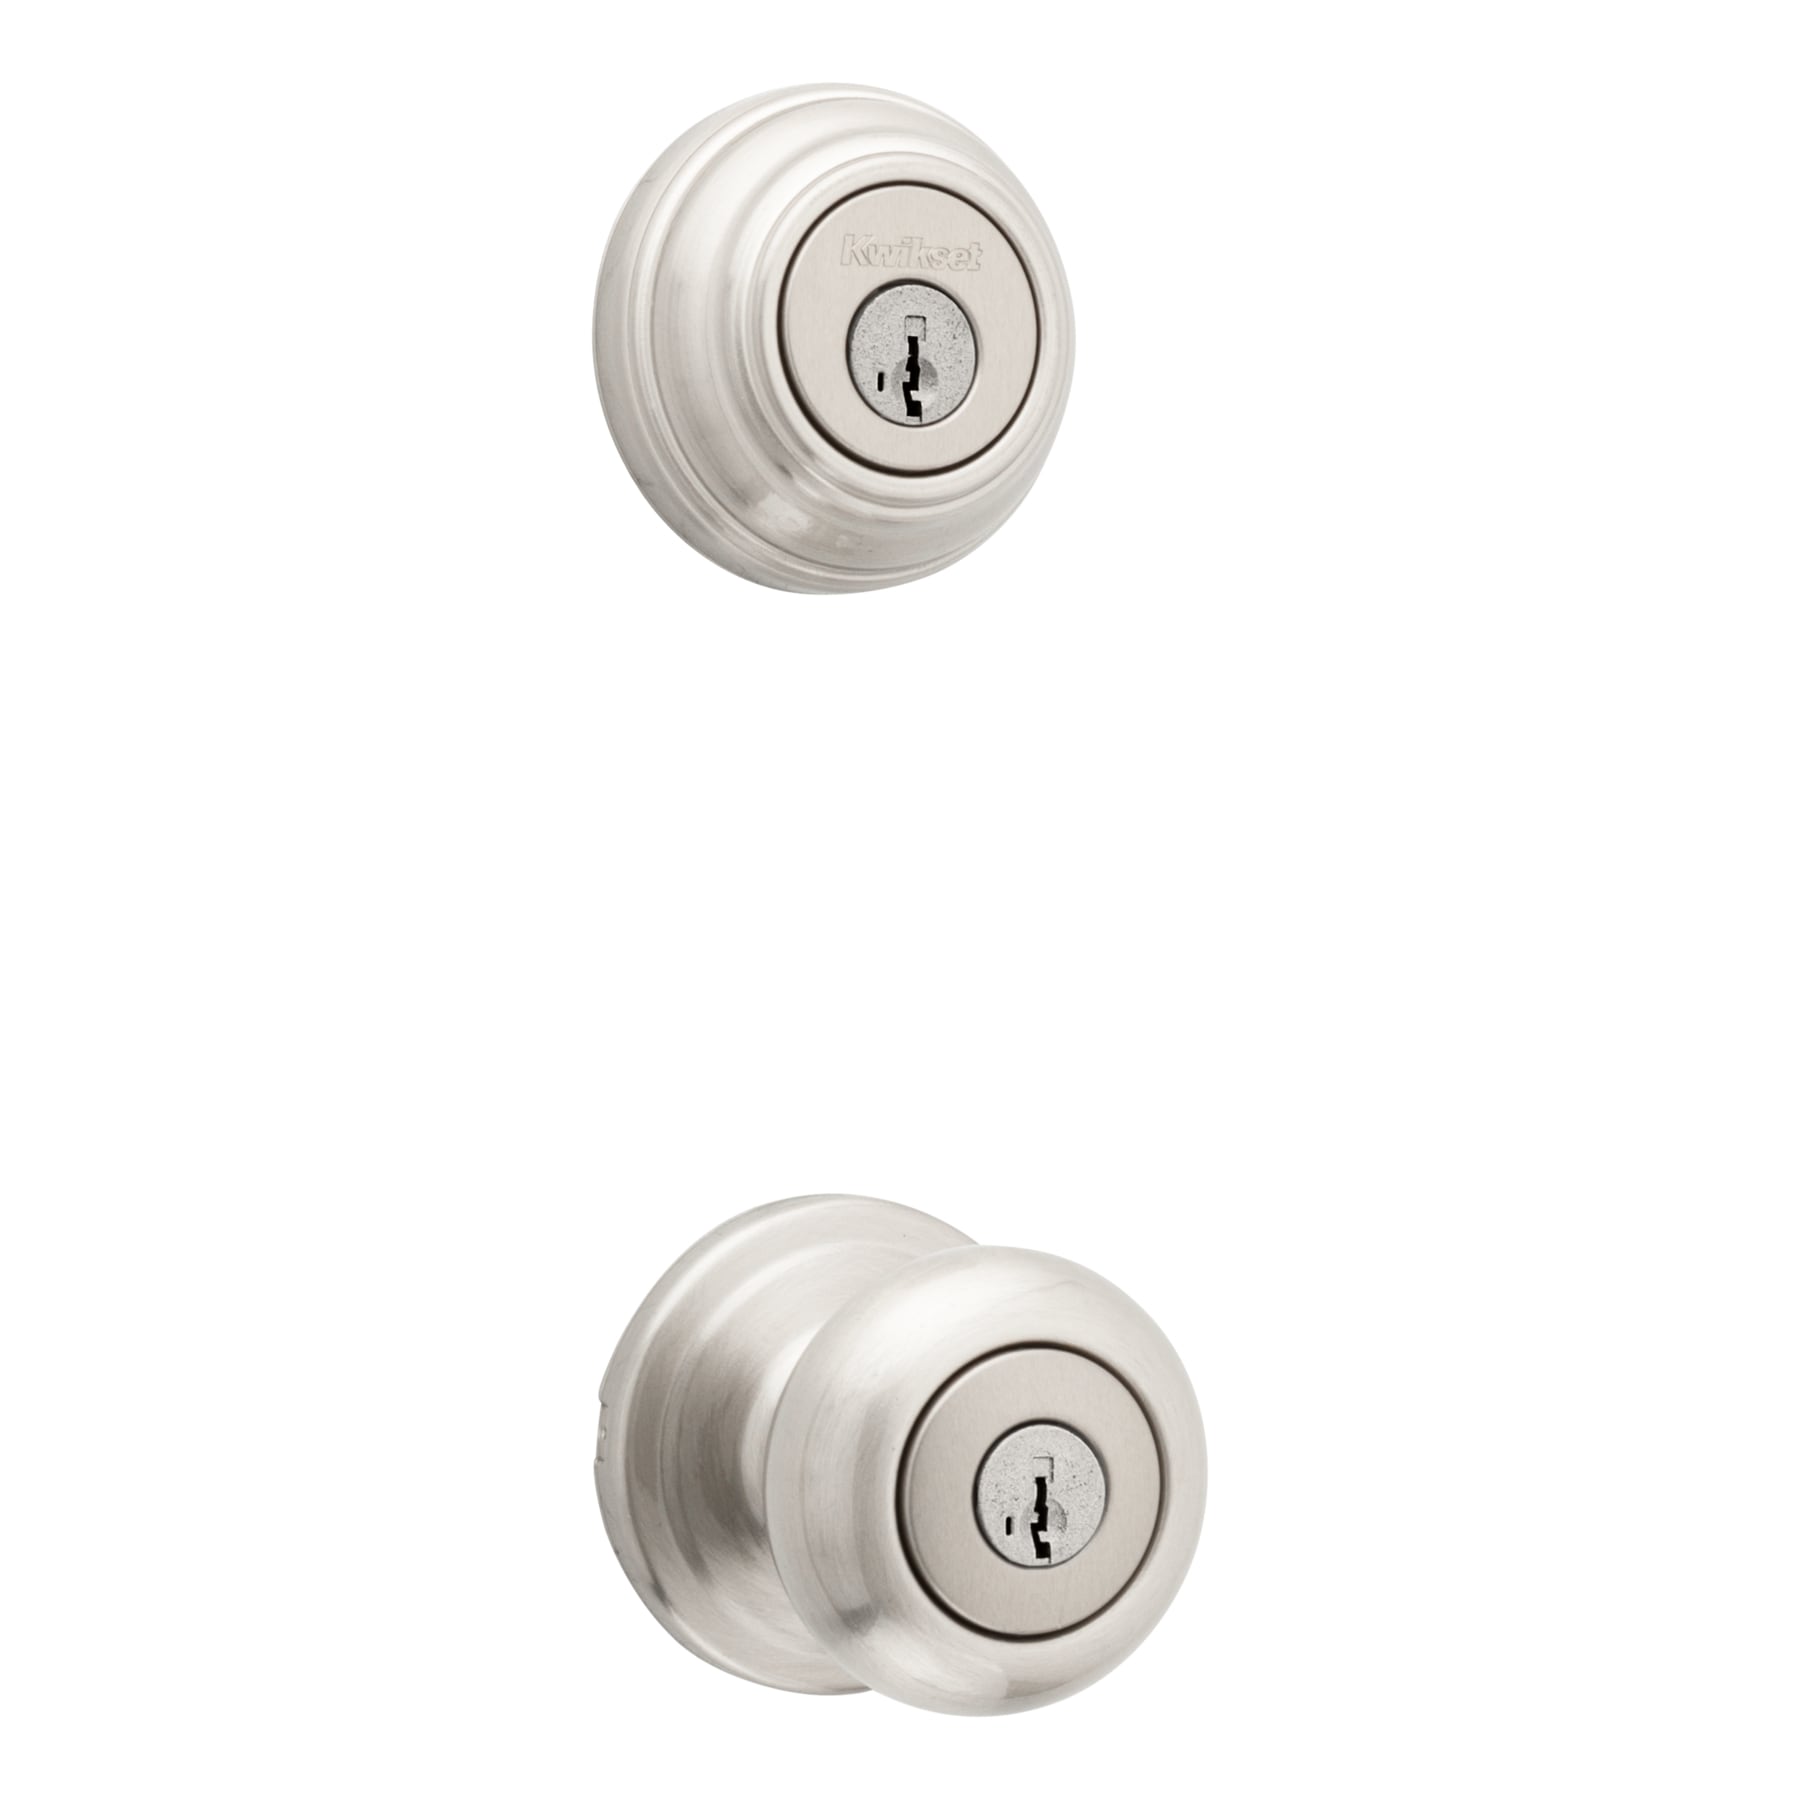 Kwikset Signature Series Signatures Juno Satin Nickel Smartkey Exterior  Single-cylinder deadbolt Keyed Entry Door Knob Combo Pack with  Antimicrobial Technology in the Door Knobs department at